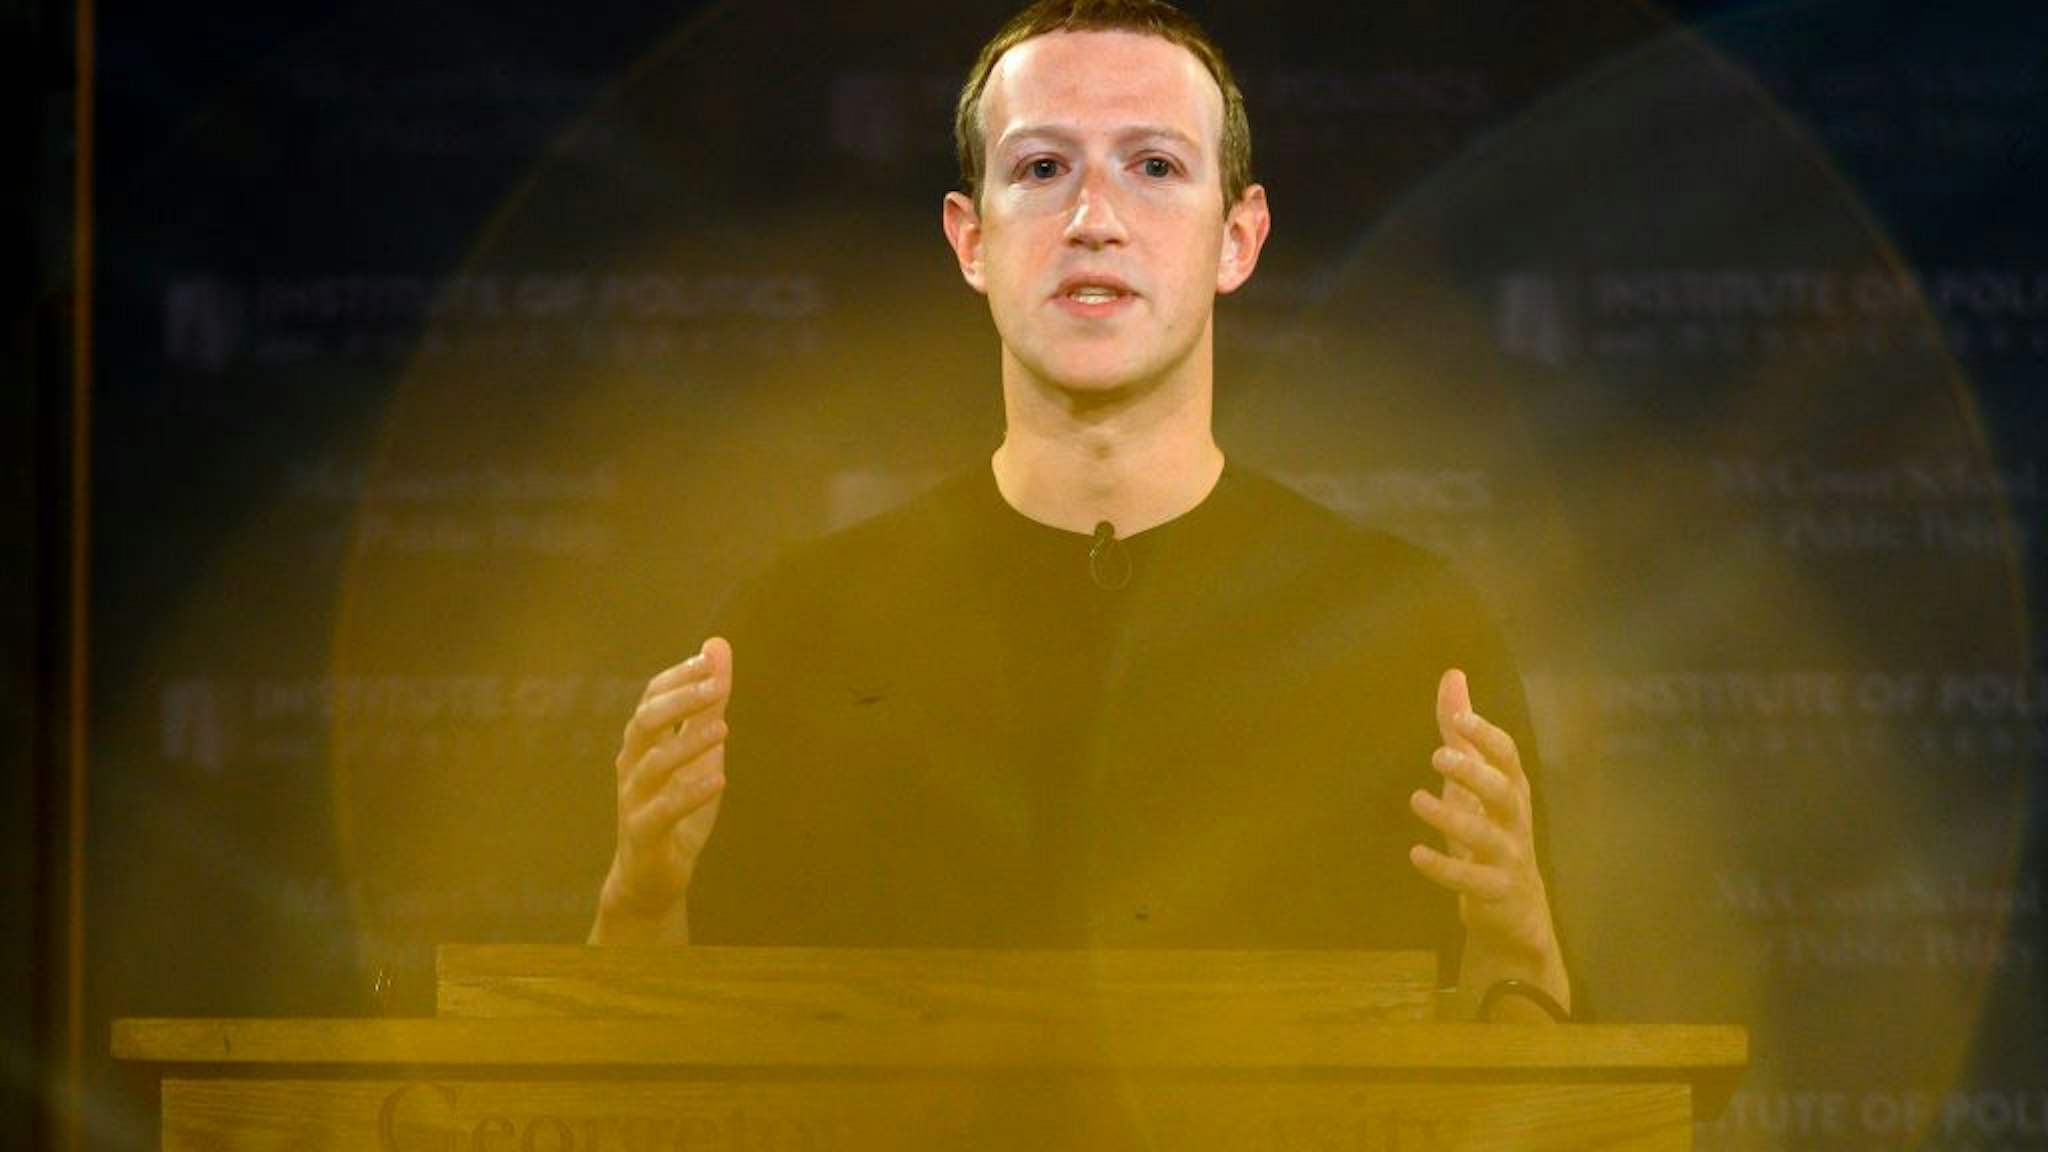 TOPSHOT - Facebook founder Mark Zuckerberg speaks at Georgetown University in a 'Conversation on Free Expression" in Washington, DC on October 17, 2019. (Photo by ANDREW CABALLERO-REYNOLDS / AFP) (Photo by ANDREW CABALLERO-REYNOLDS/AFP via Getty Images)